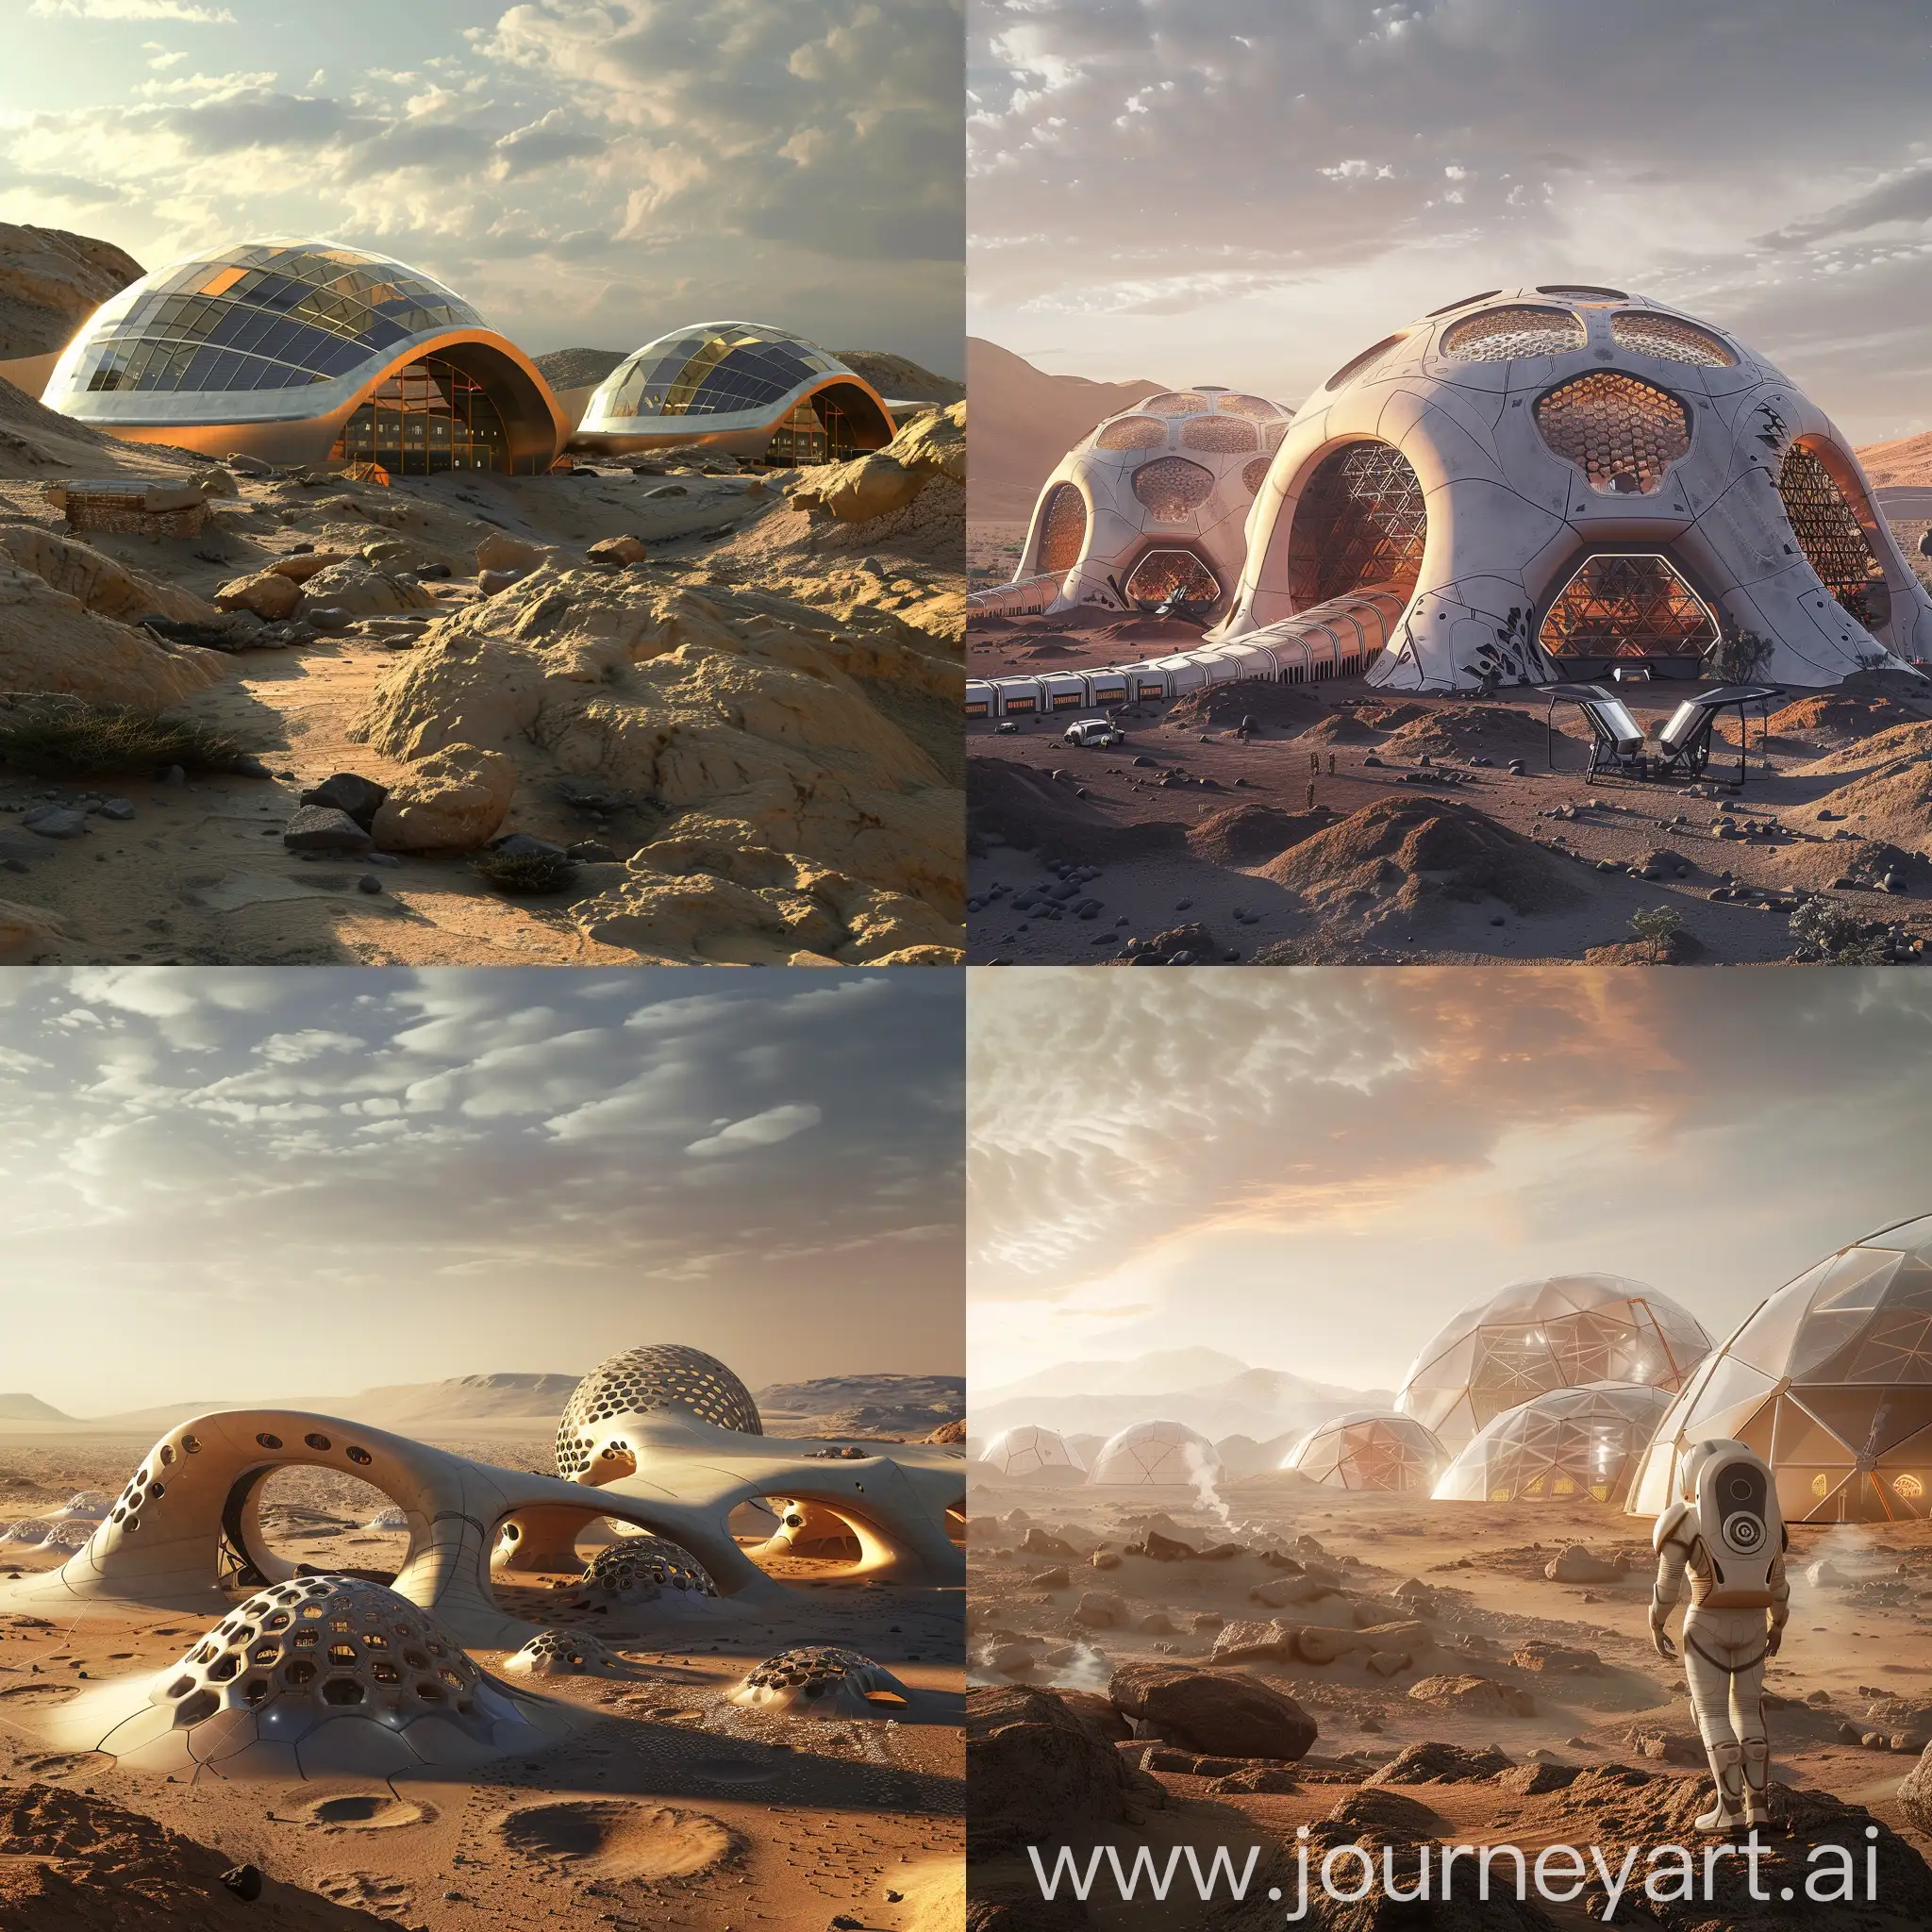 SciFi-Mars-Habitat-with-Advanced-Technology-and-Robotic-Construction